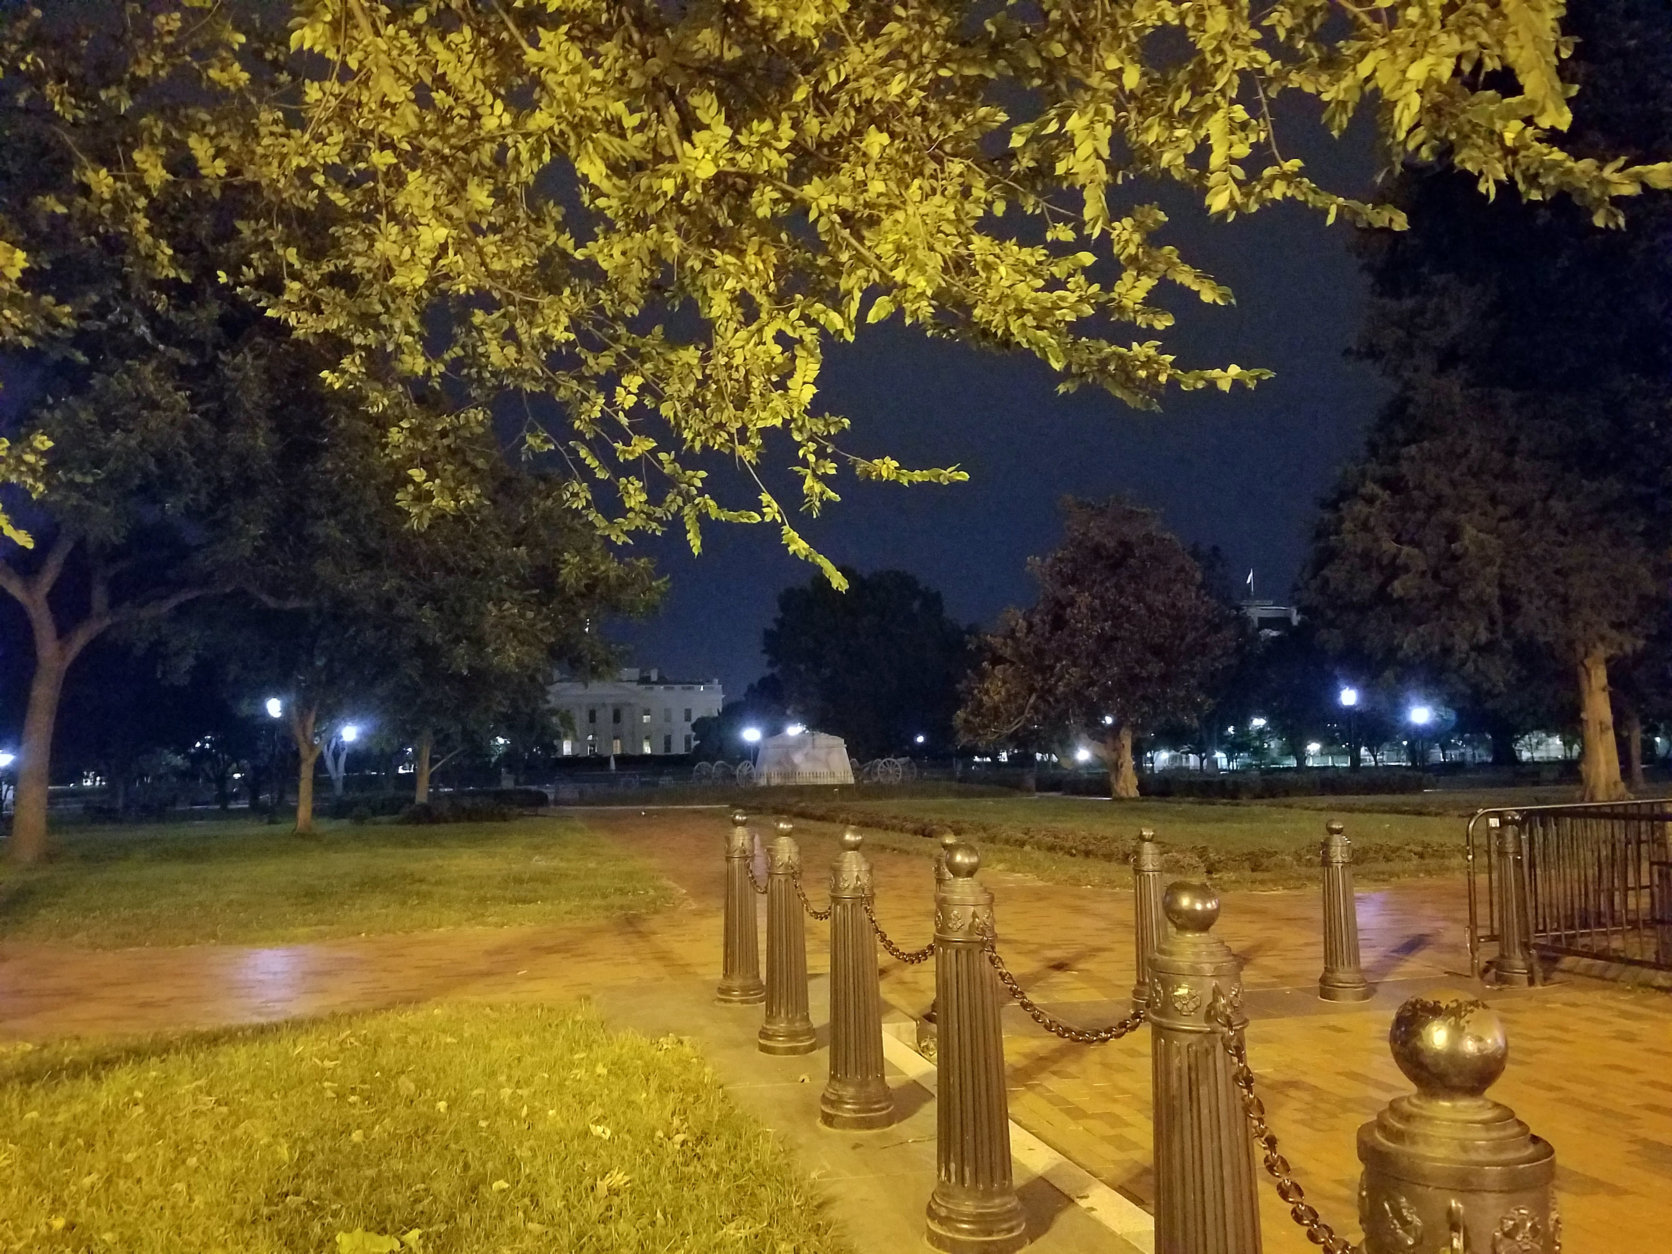 Lafayette Square Park in the wee hours of the morning, with the White House in the distance. (WTOP/Will Vitka)